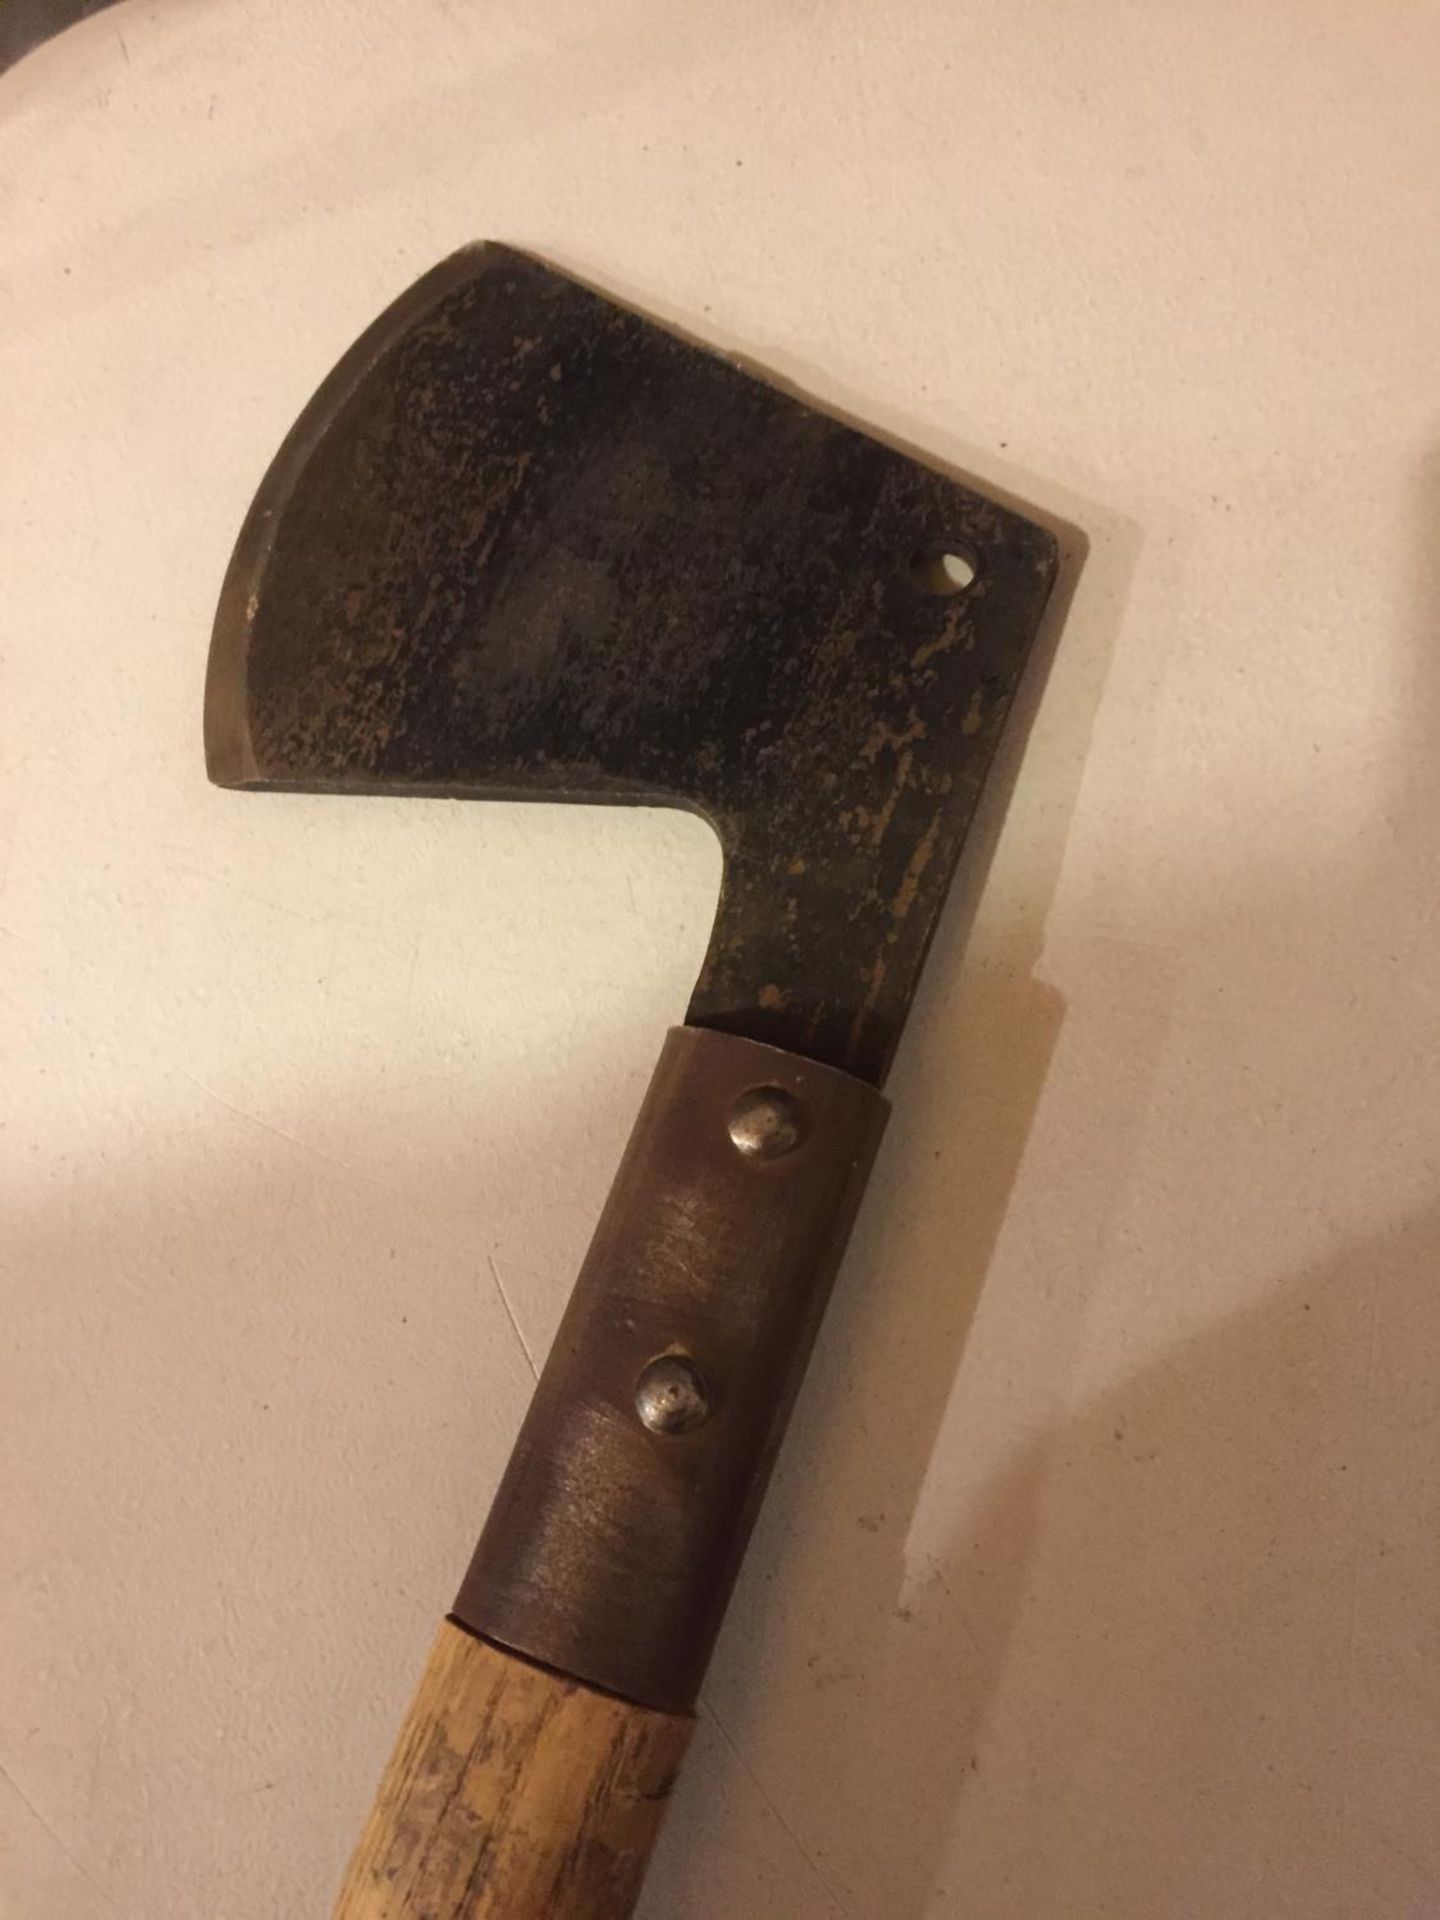 A KEENCUT MEAT CLEAVER - Image 2 of 3